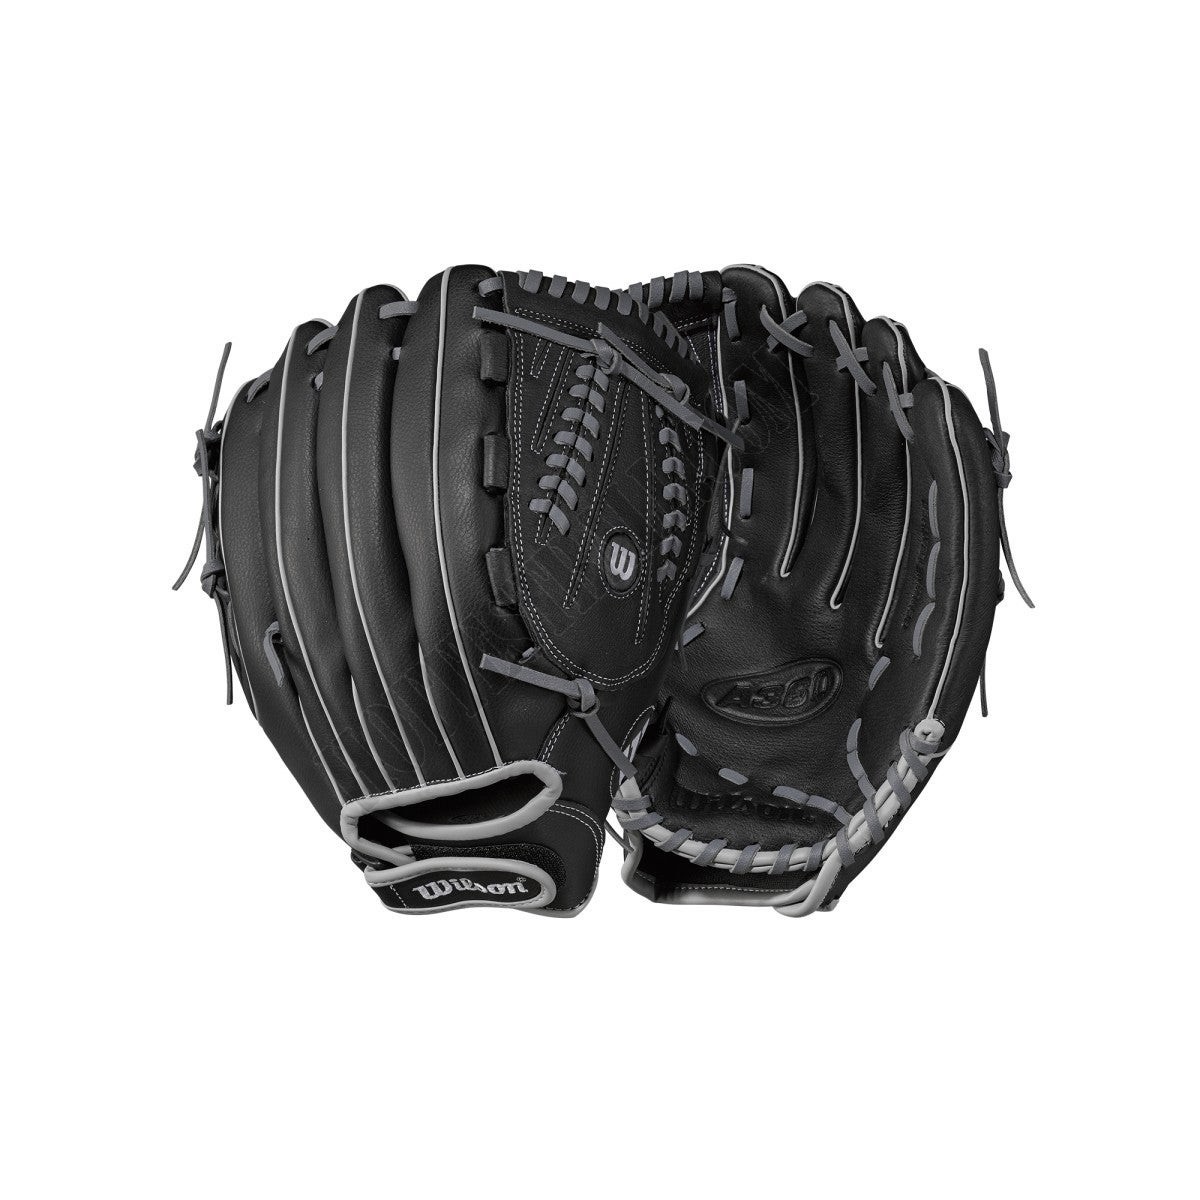 A360 13" Slowpitch Glove - Right Hand Throw ● Wilson Promotions - -0